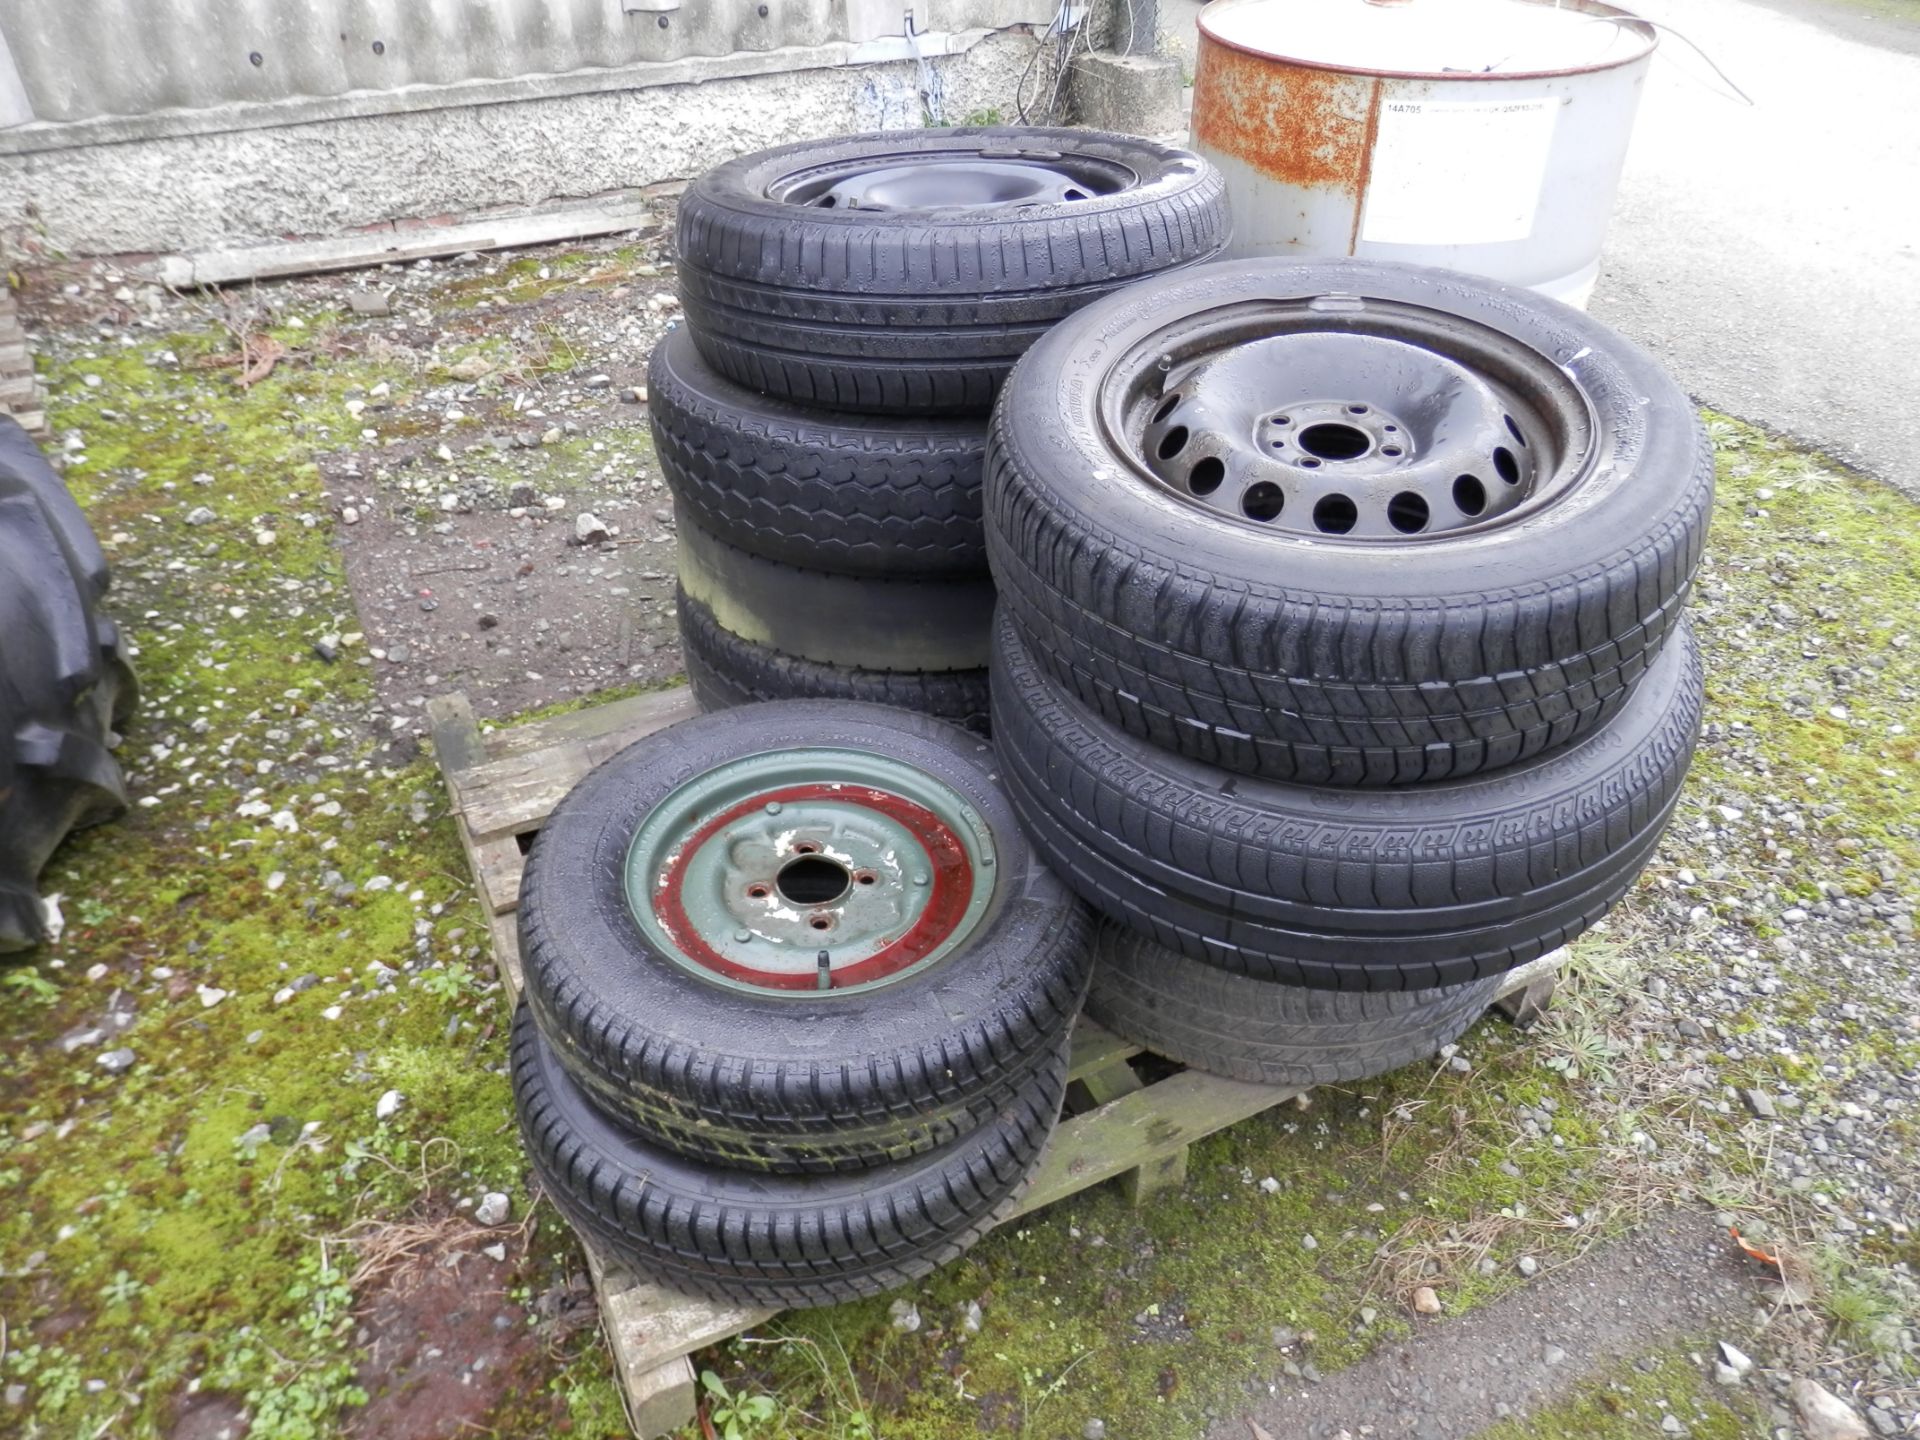 85 + ASSORTED LORRY, CAR & TRAILER TYRES & WHEELS, AS PICTURED. BUYER TO COLLECT COMPLETE JOBLOT. - Image 10 of 10